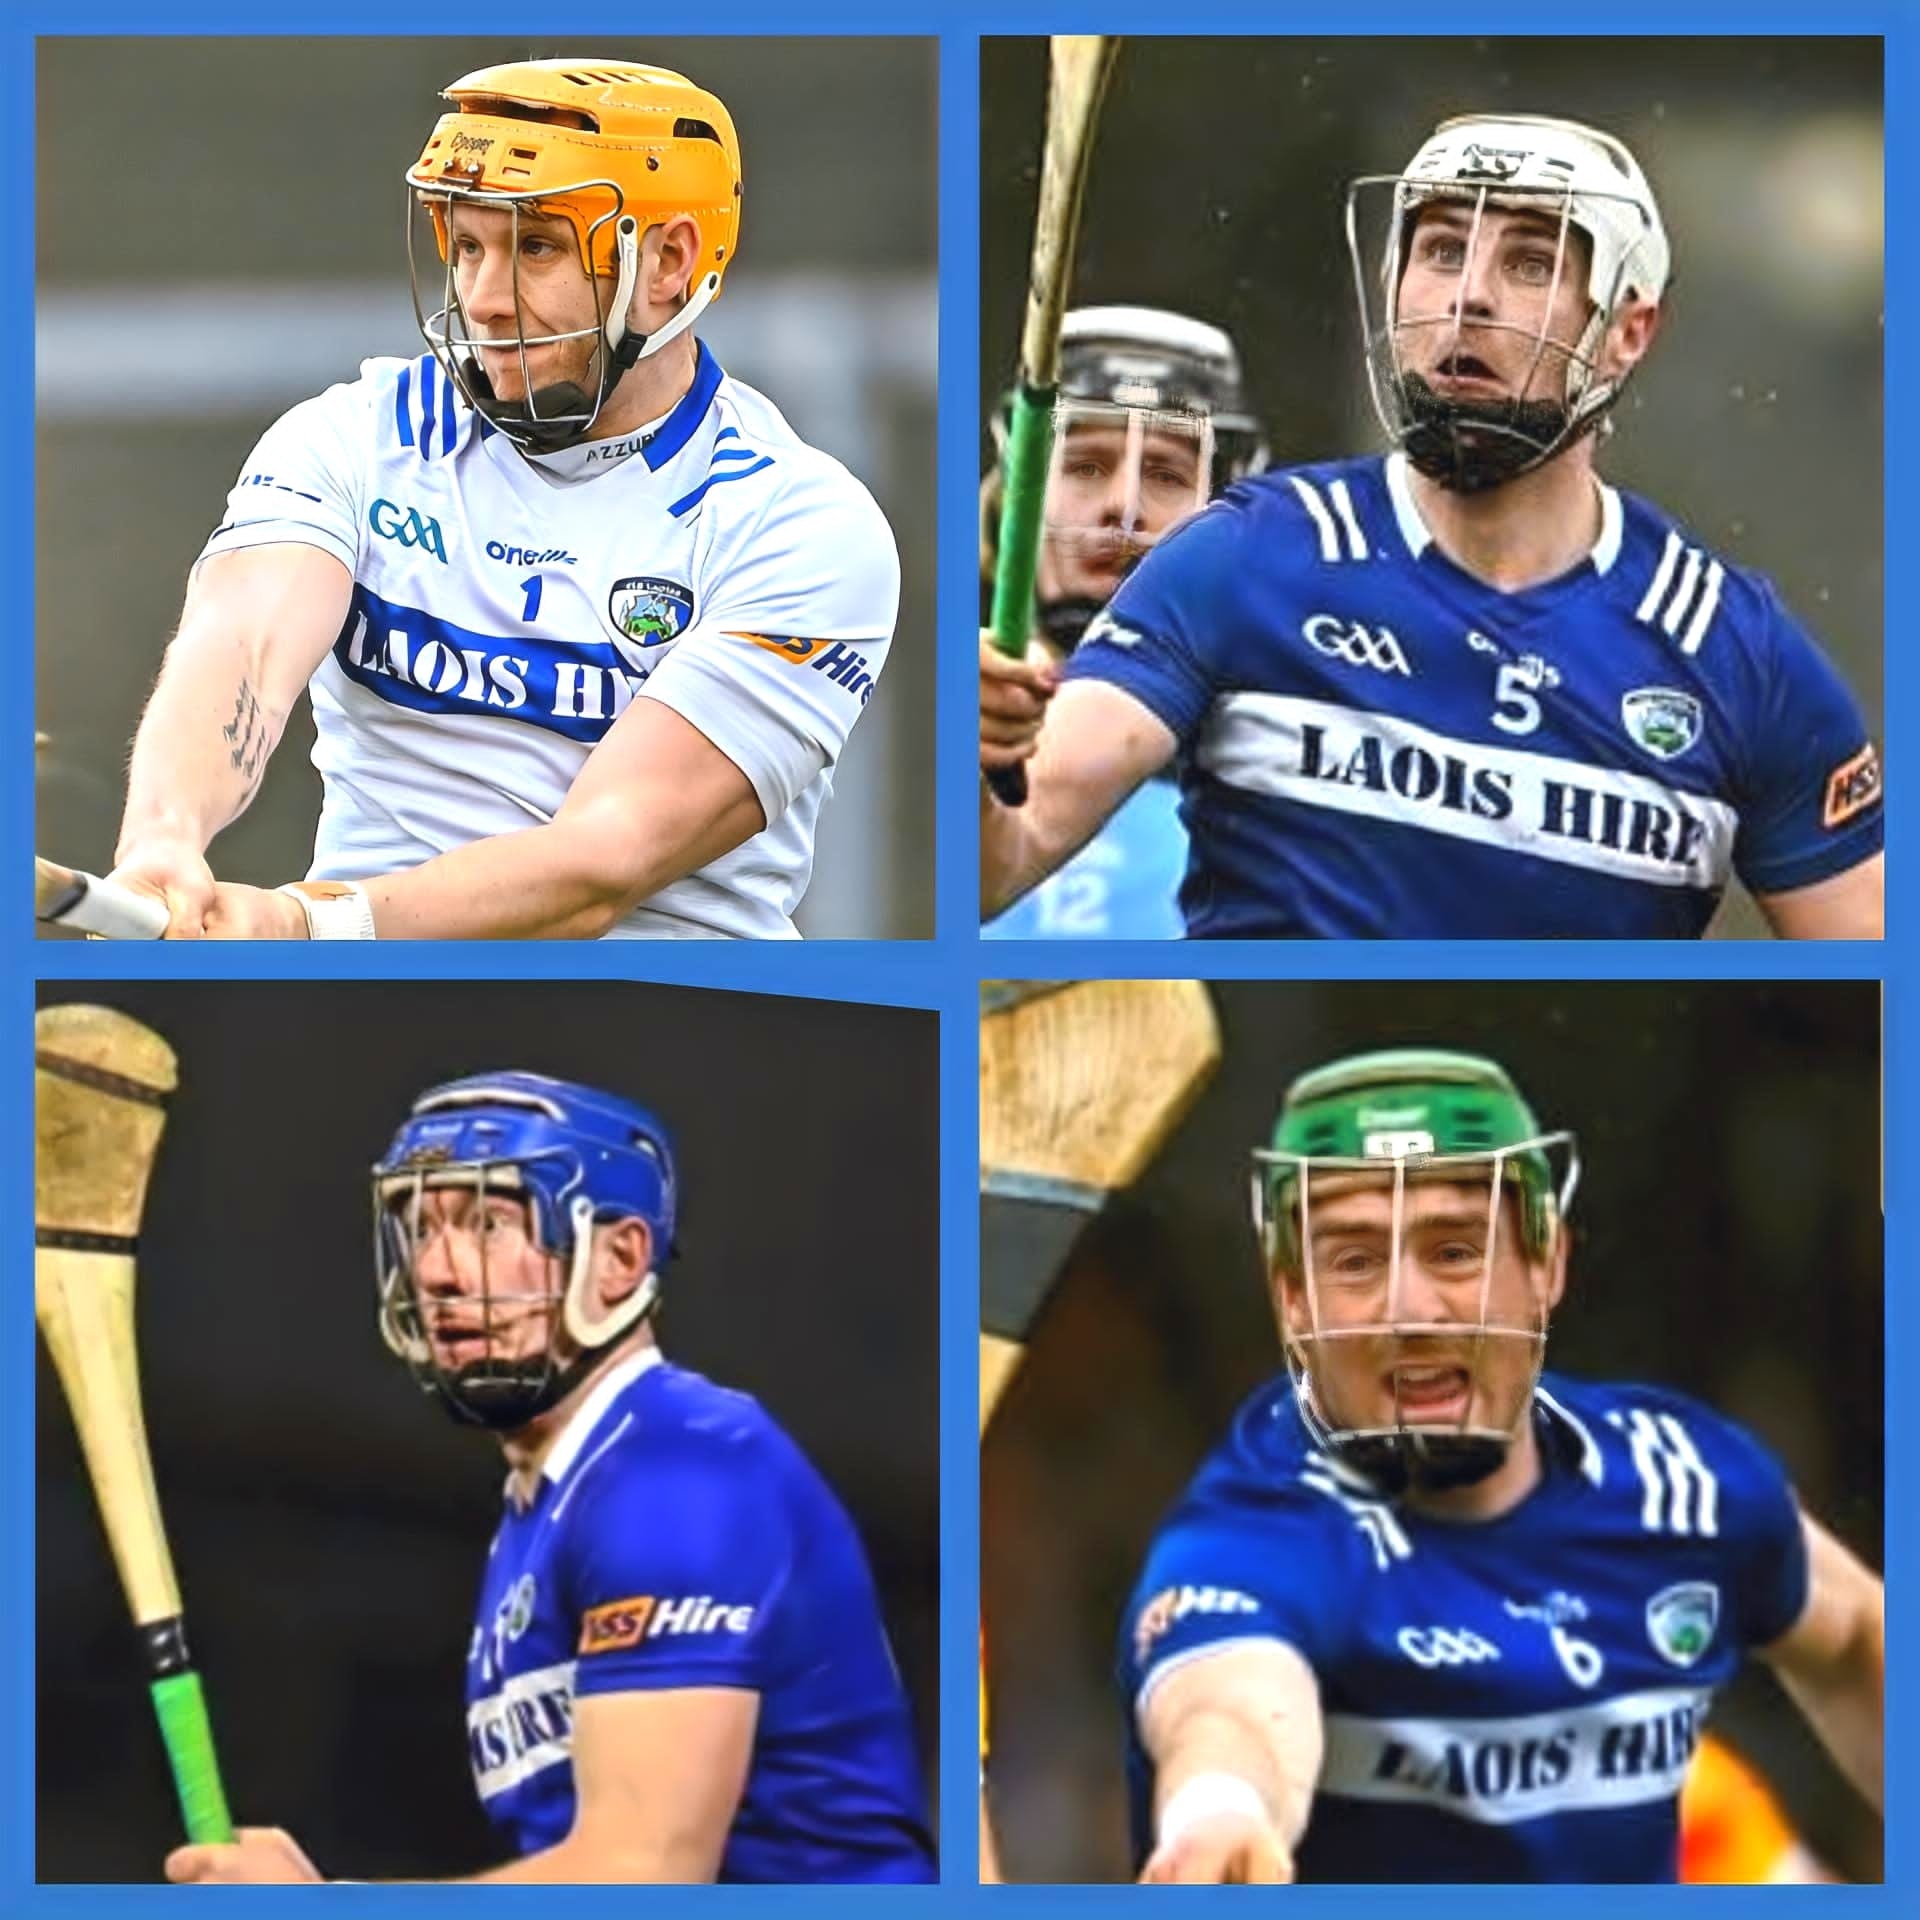 4 Laois Players included in Ireland squad announced for Hurling-Shinty International v Scotland